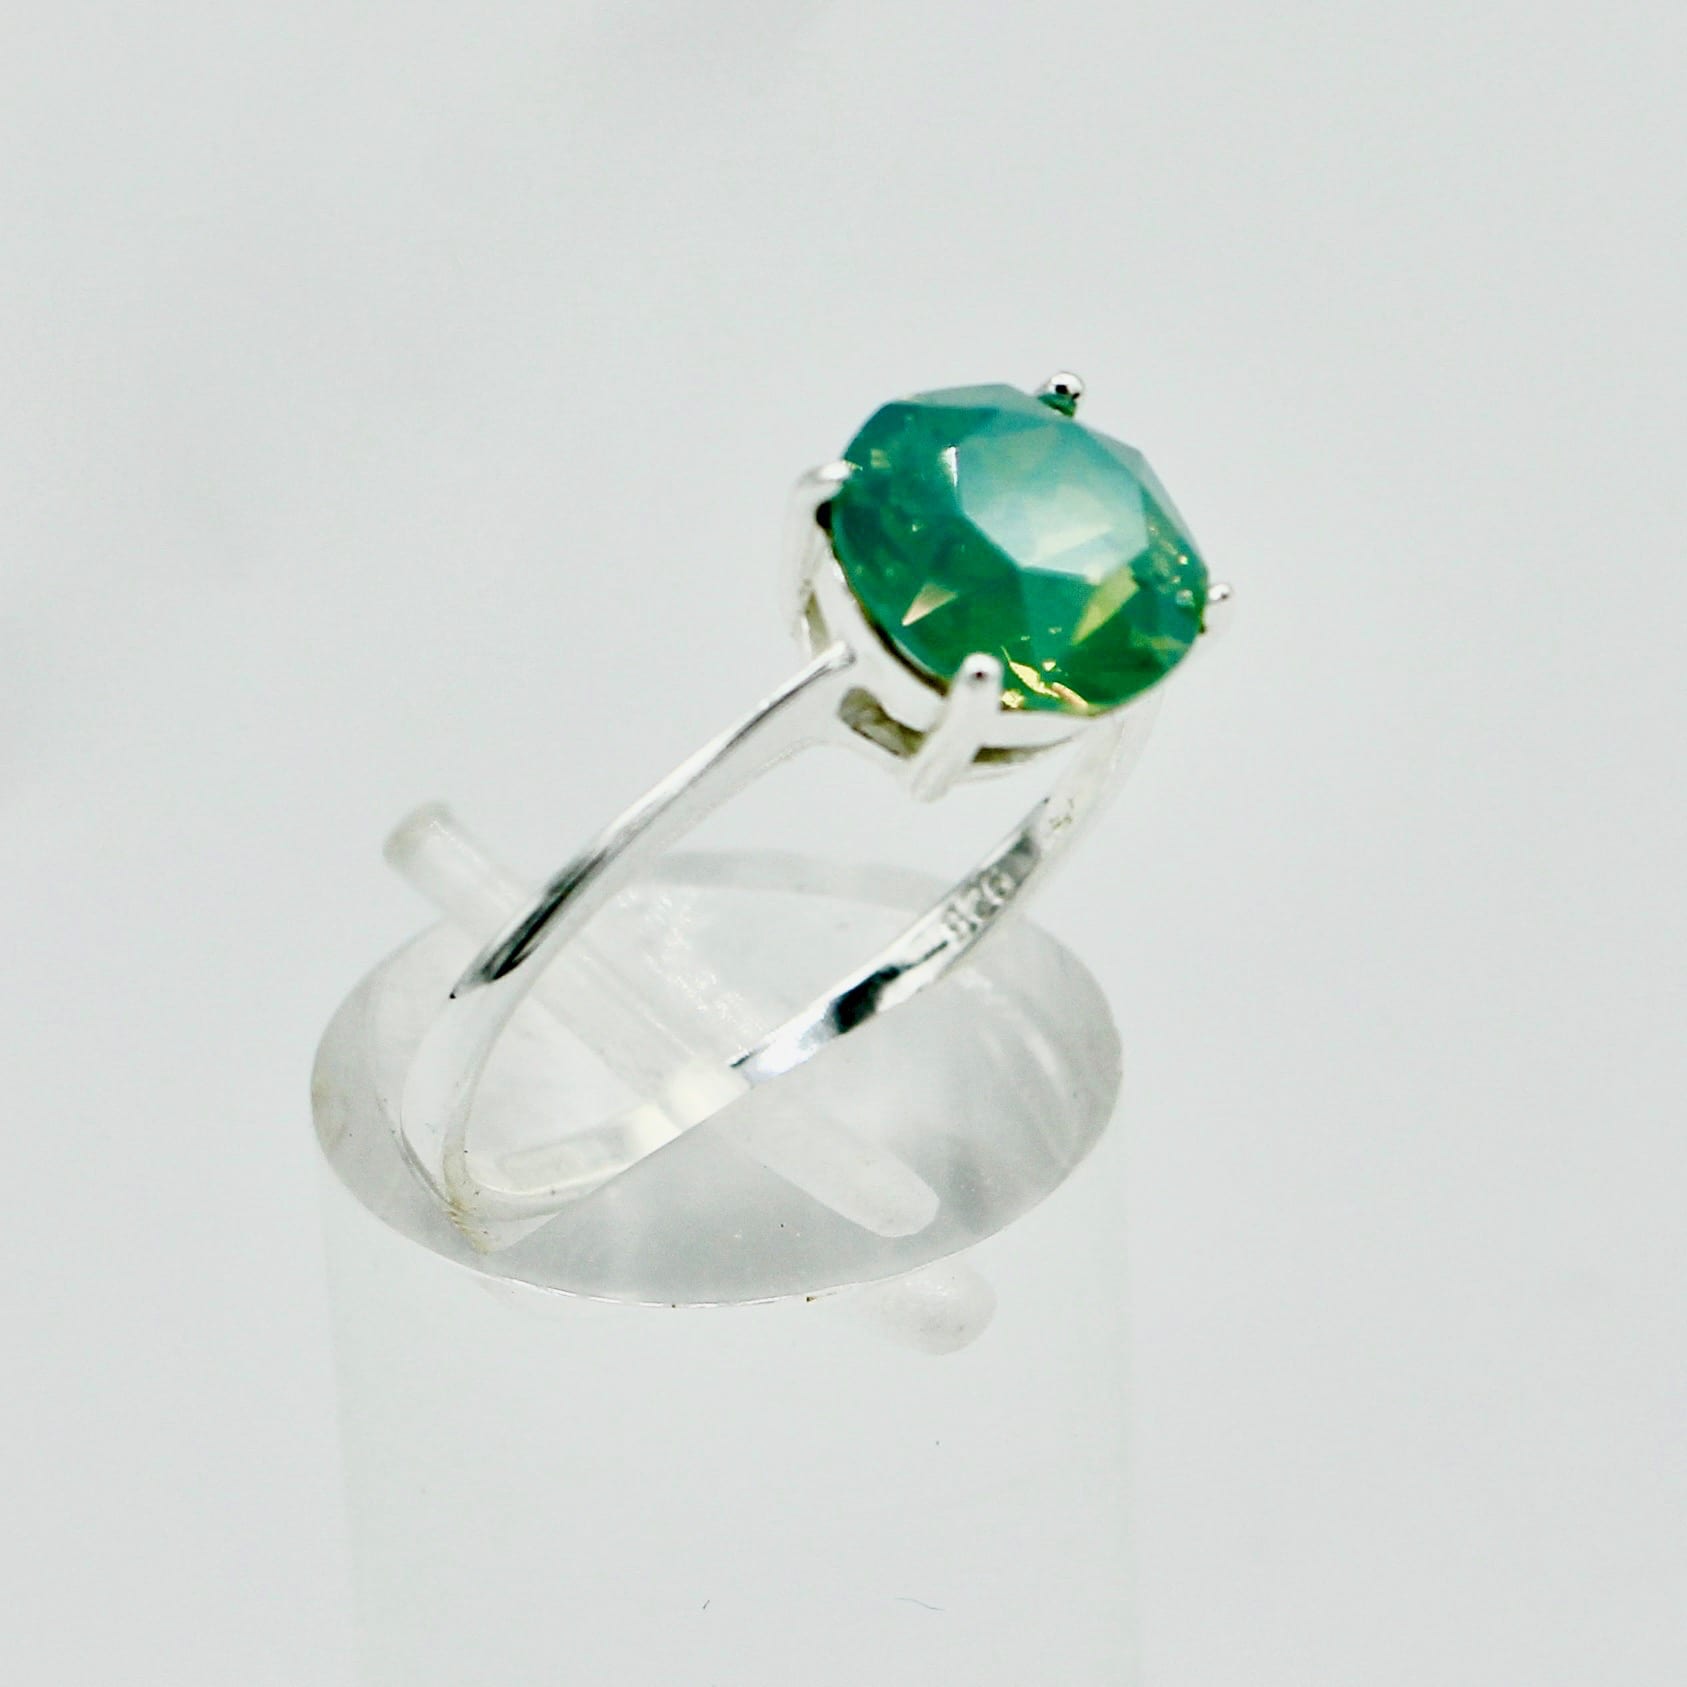 Solitaire Crystal Ring